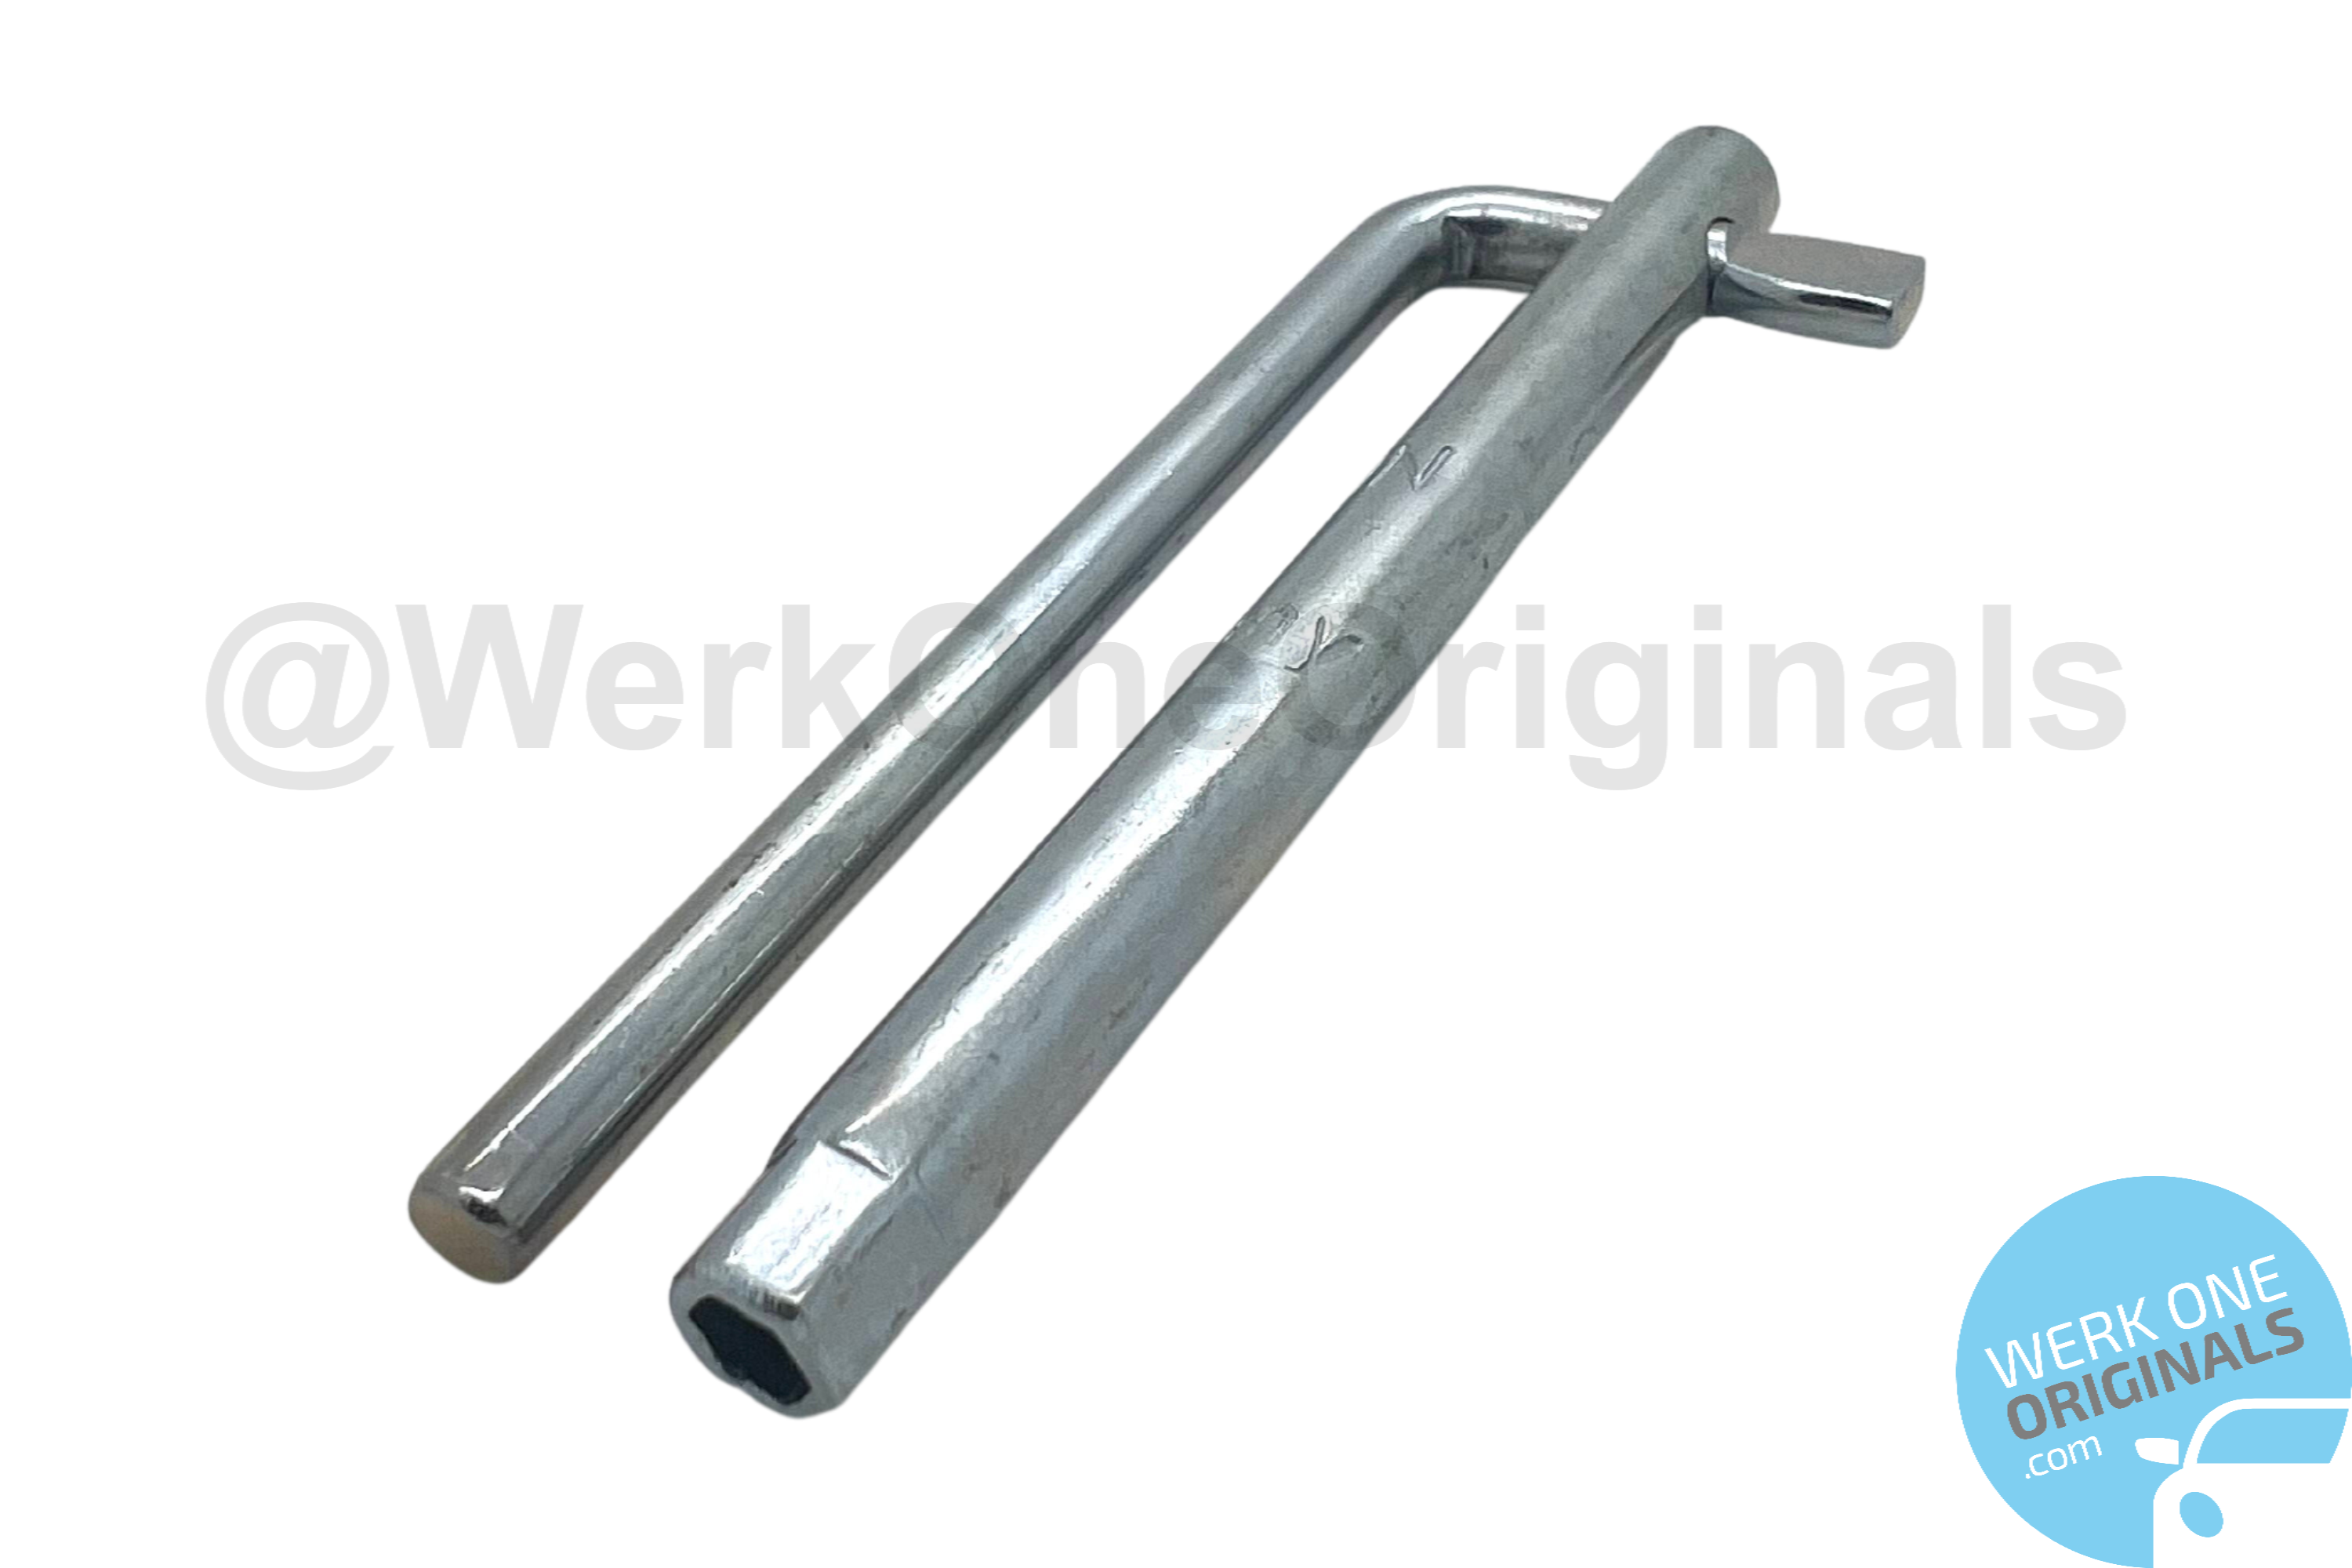 Porsche Headlight Removal Tool for 911 Type 996 Models